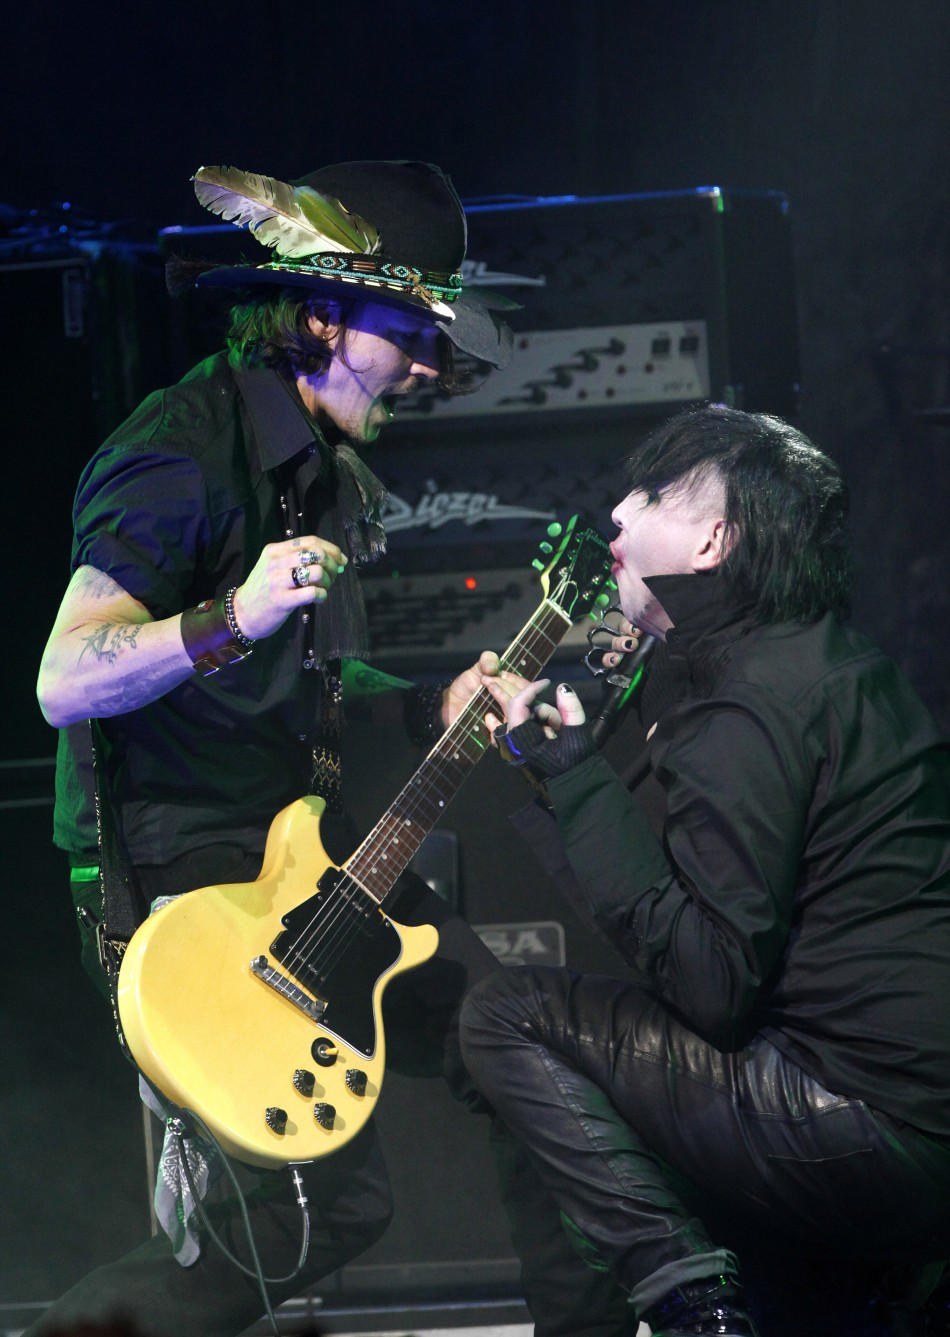 Johnny Depp L performs with musician Marilyn Manson at the 4th annual Golden Gods awards at Nokia theatre in Los Angeles, California April 11, 2012.